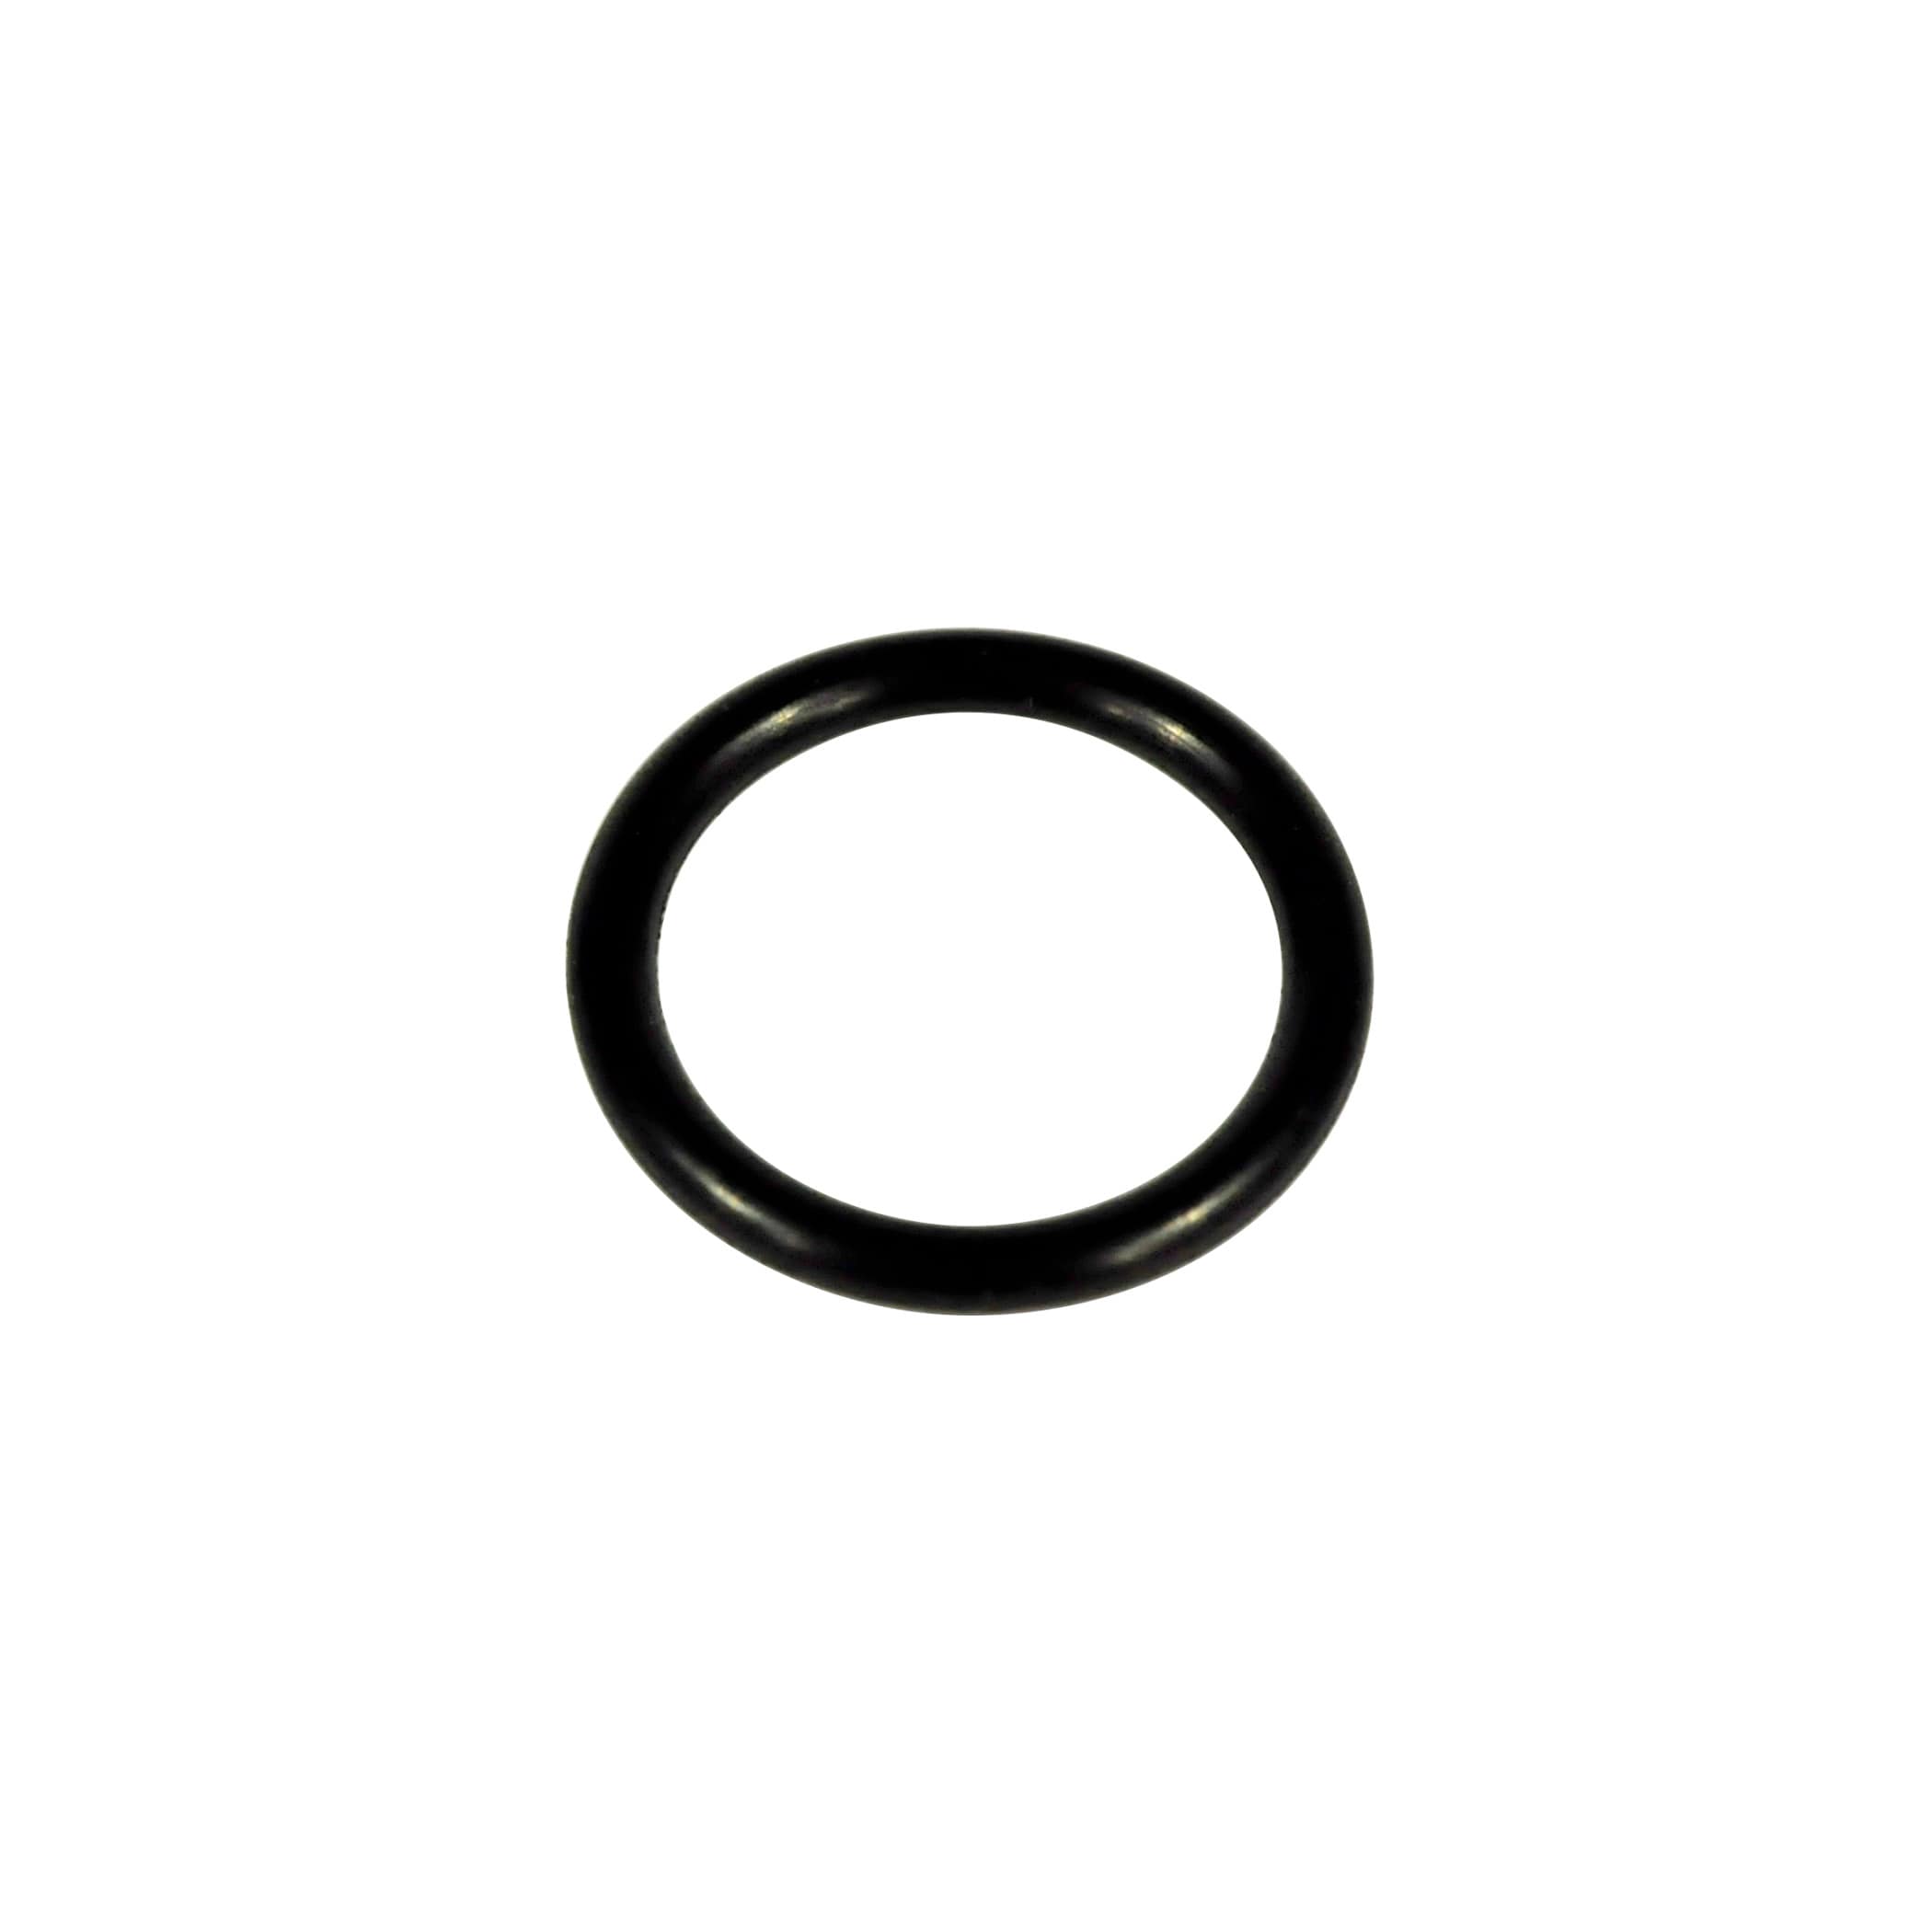 SQUARE & ROUND STANDARD RUBBER O-RINGS 3/32" PAINTBALL 